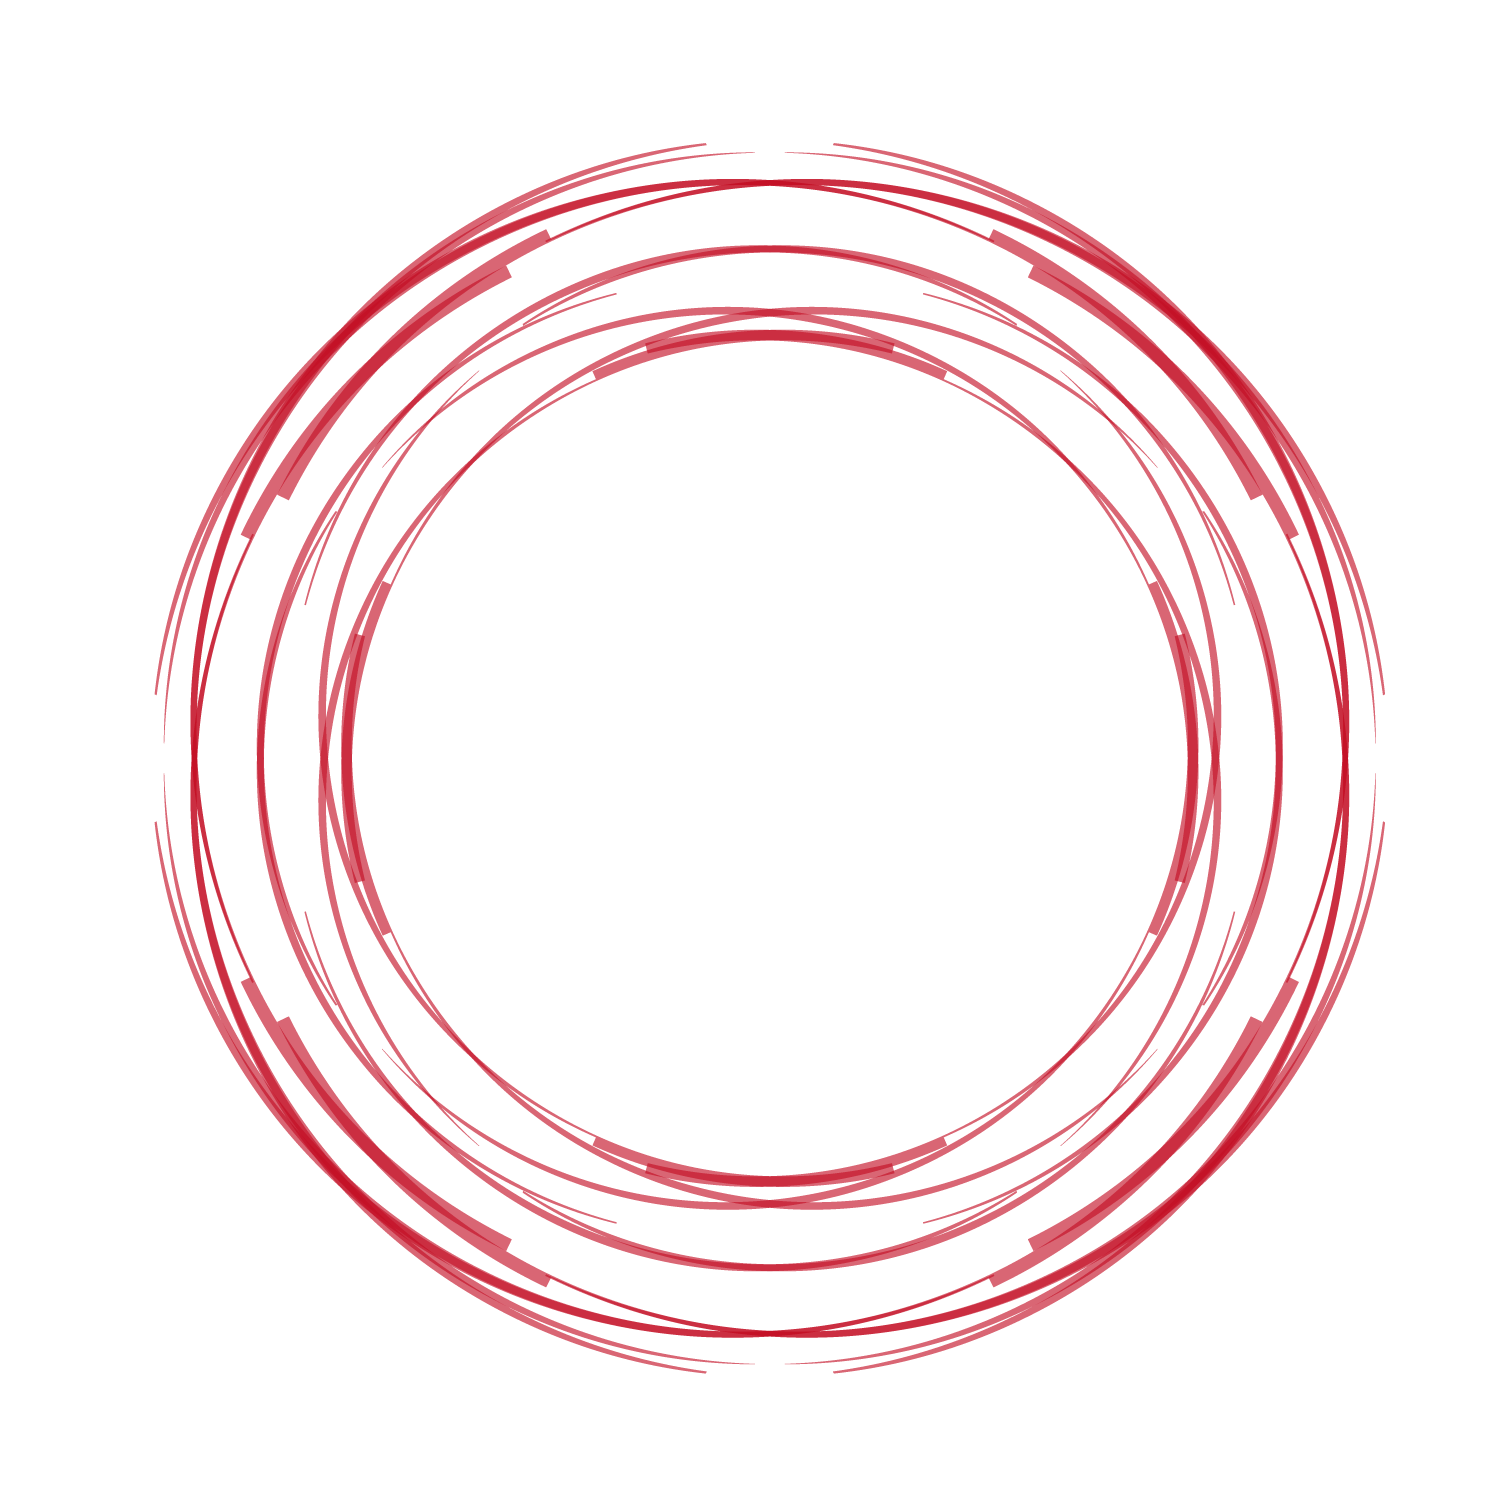 Hollow Circle Vector Red Hand-Painted Free Transparent Image HQ Clipart